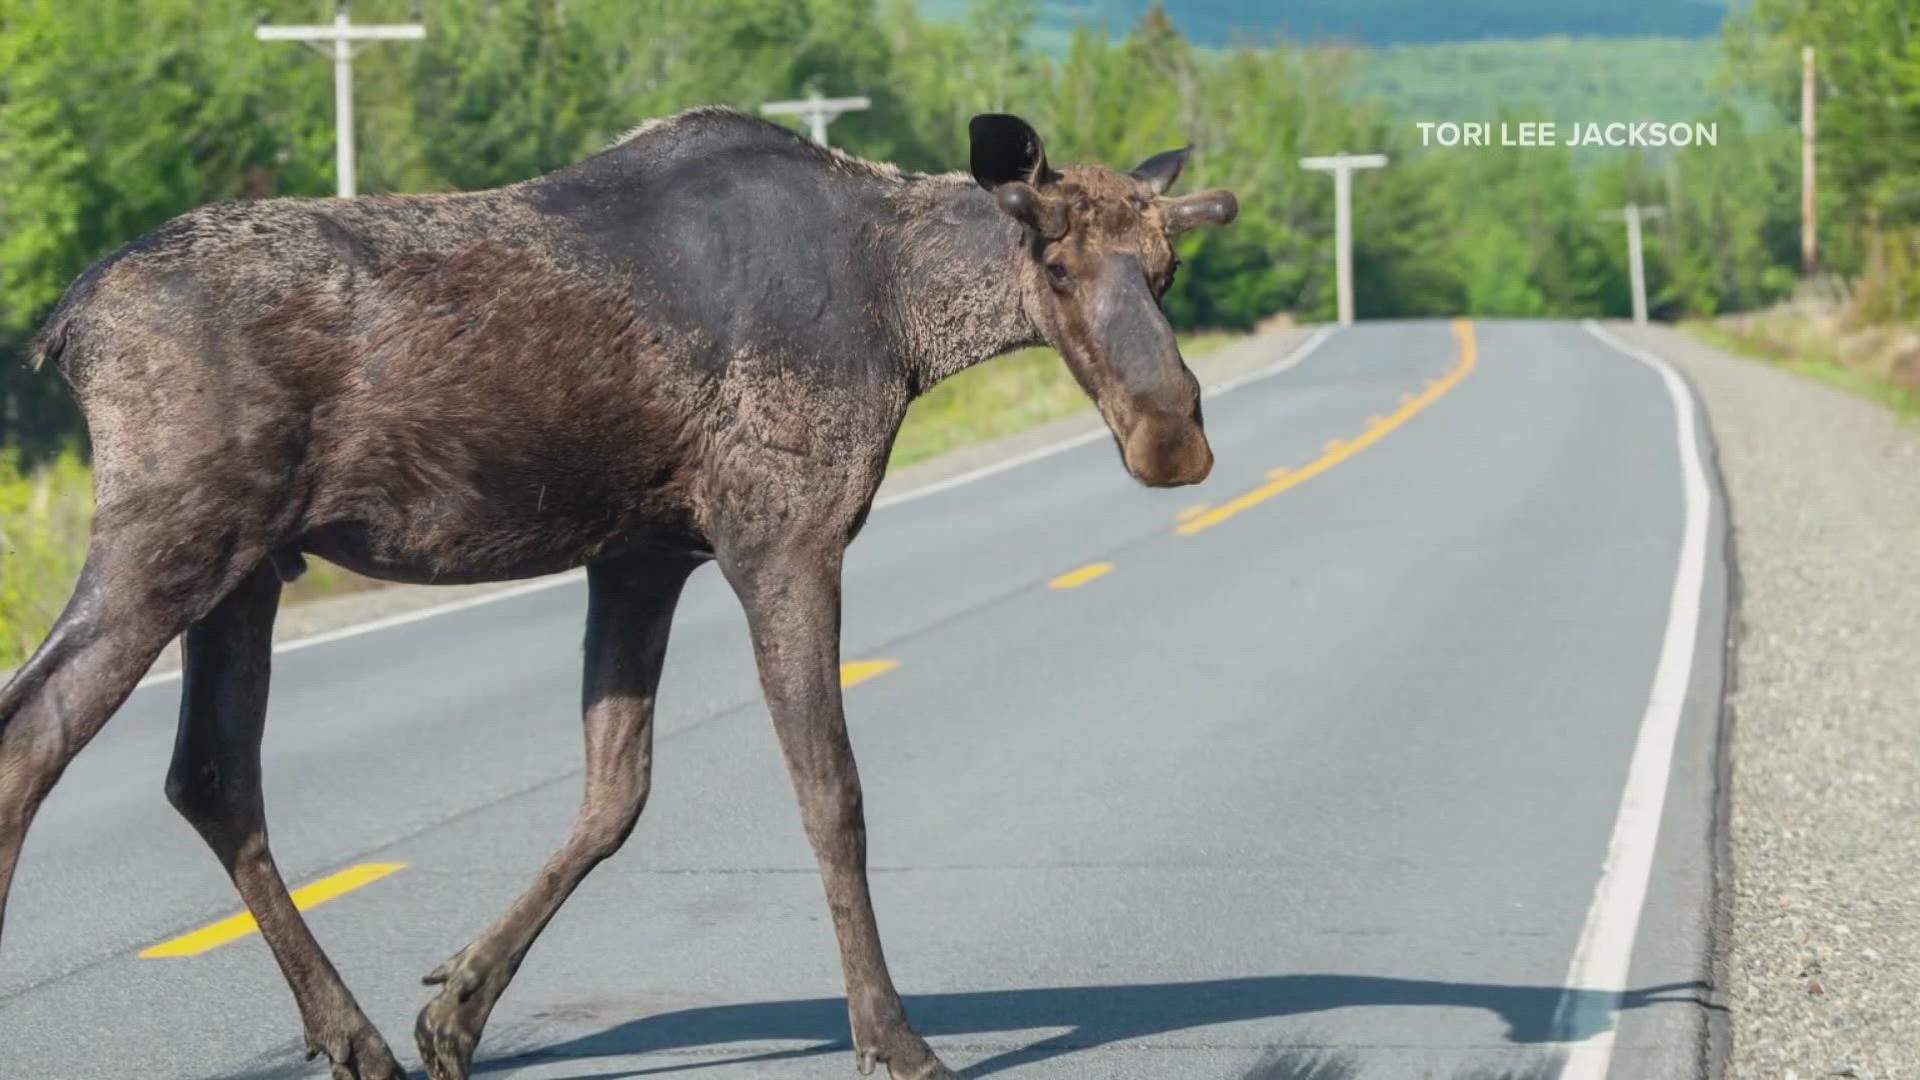 The parasites are linked to a record mortality rate this year in moose calves in remote Somerset and Piscataquis counties.